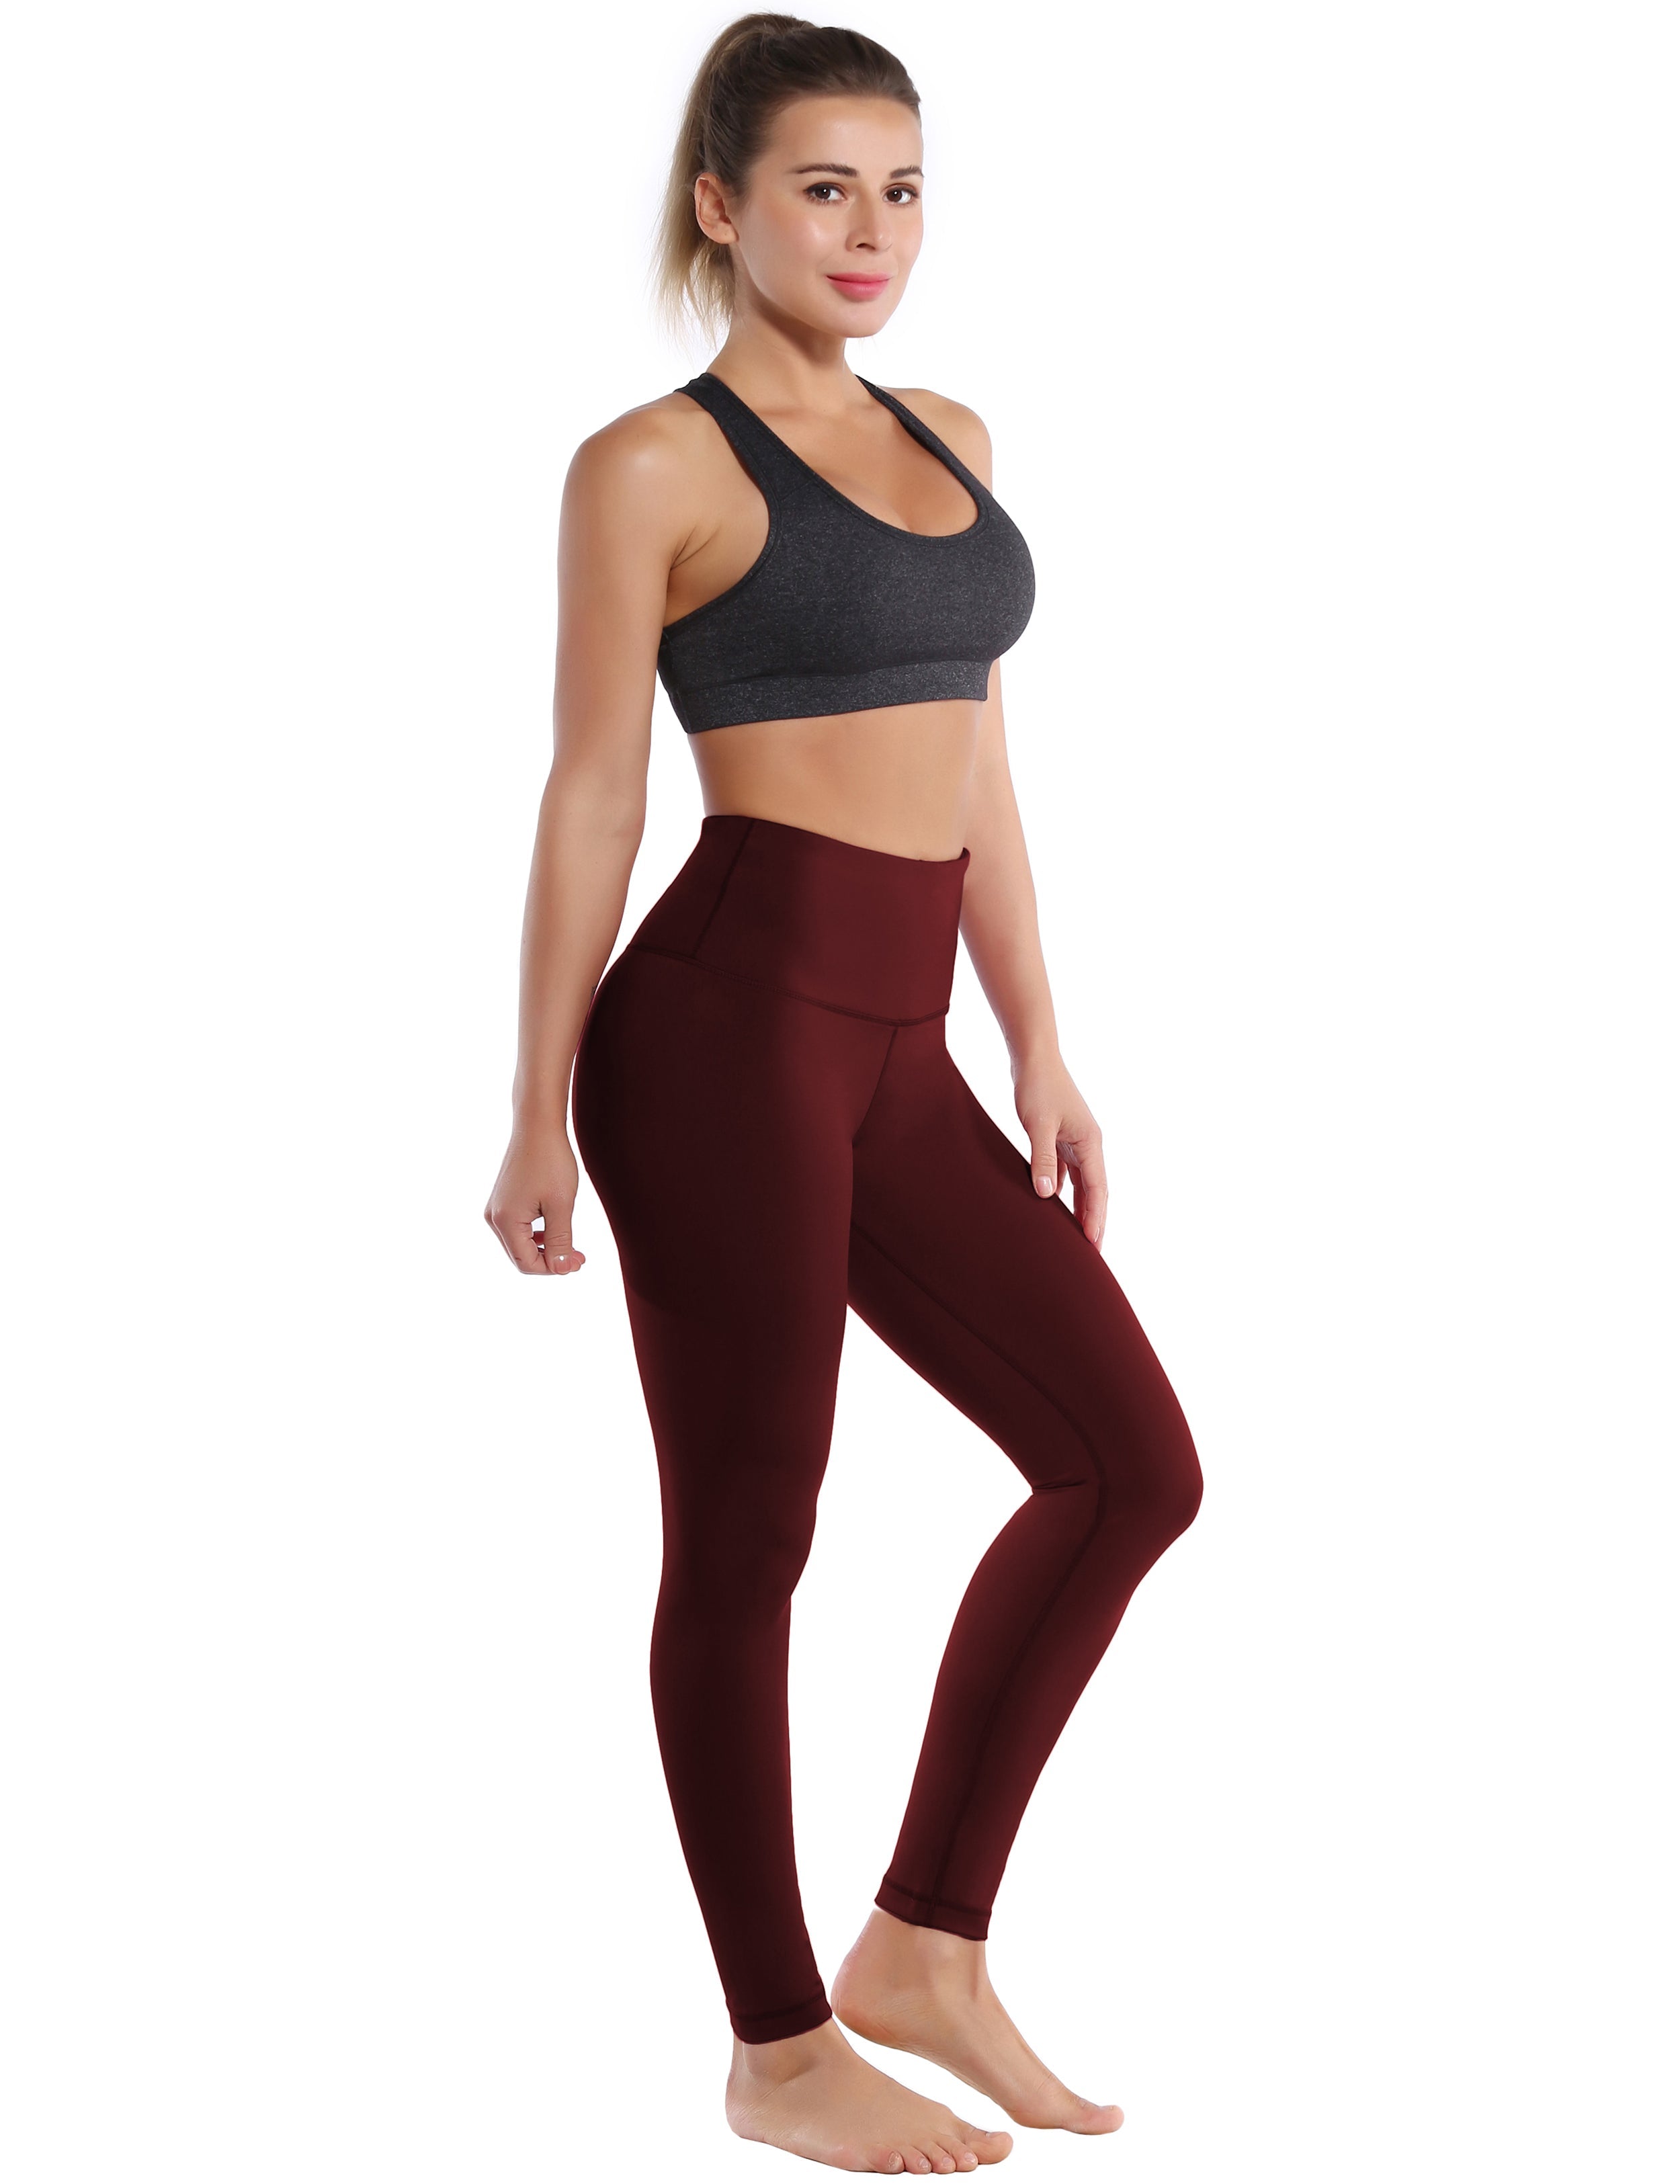 High Waist yogastudio Pants cherryred 75%Nylon/25%Spandex Fabric doesn't attract lint easily 4-way stretch No see-through Moisture-wicking Tummy control Inner pocket Four lengths